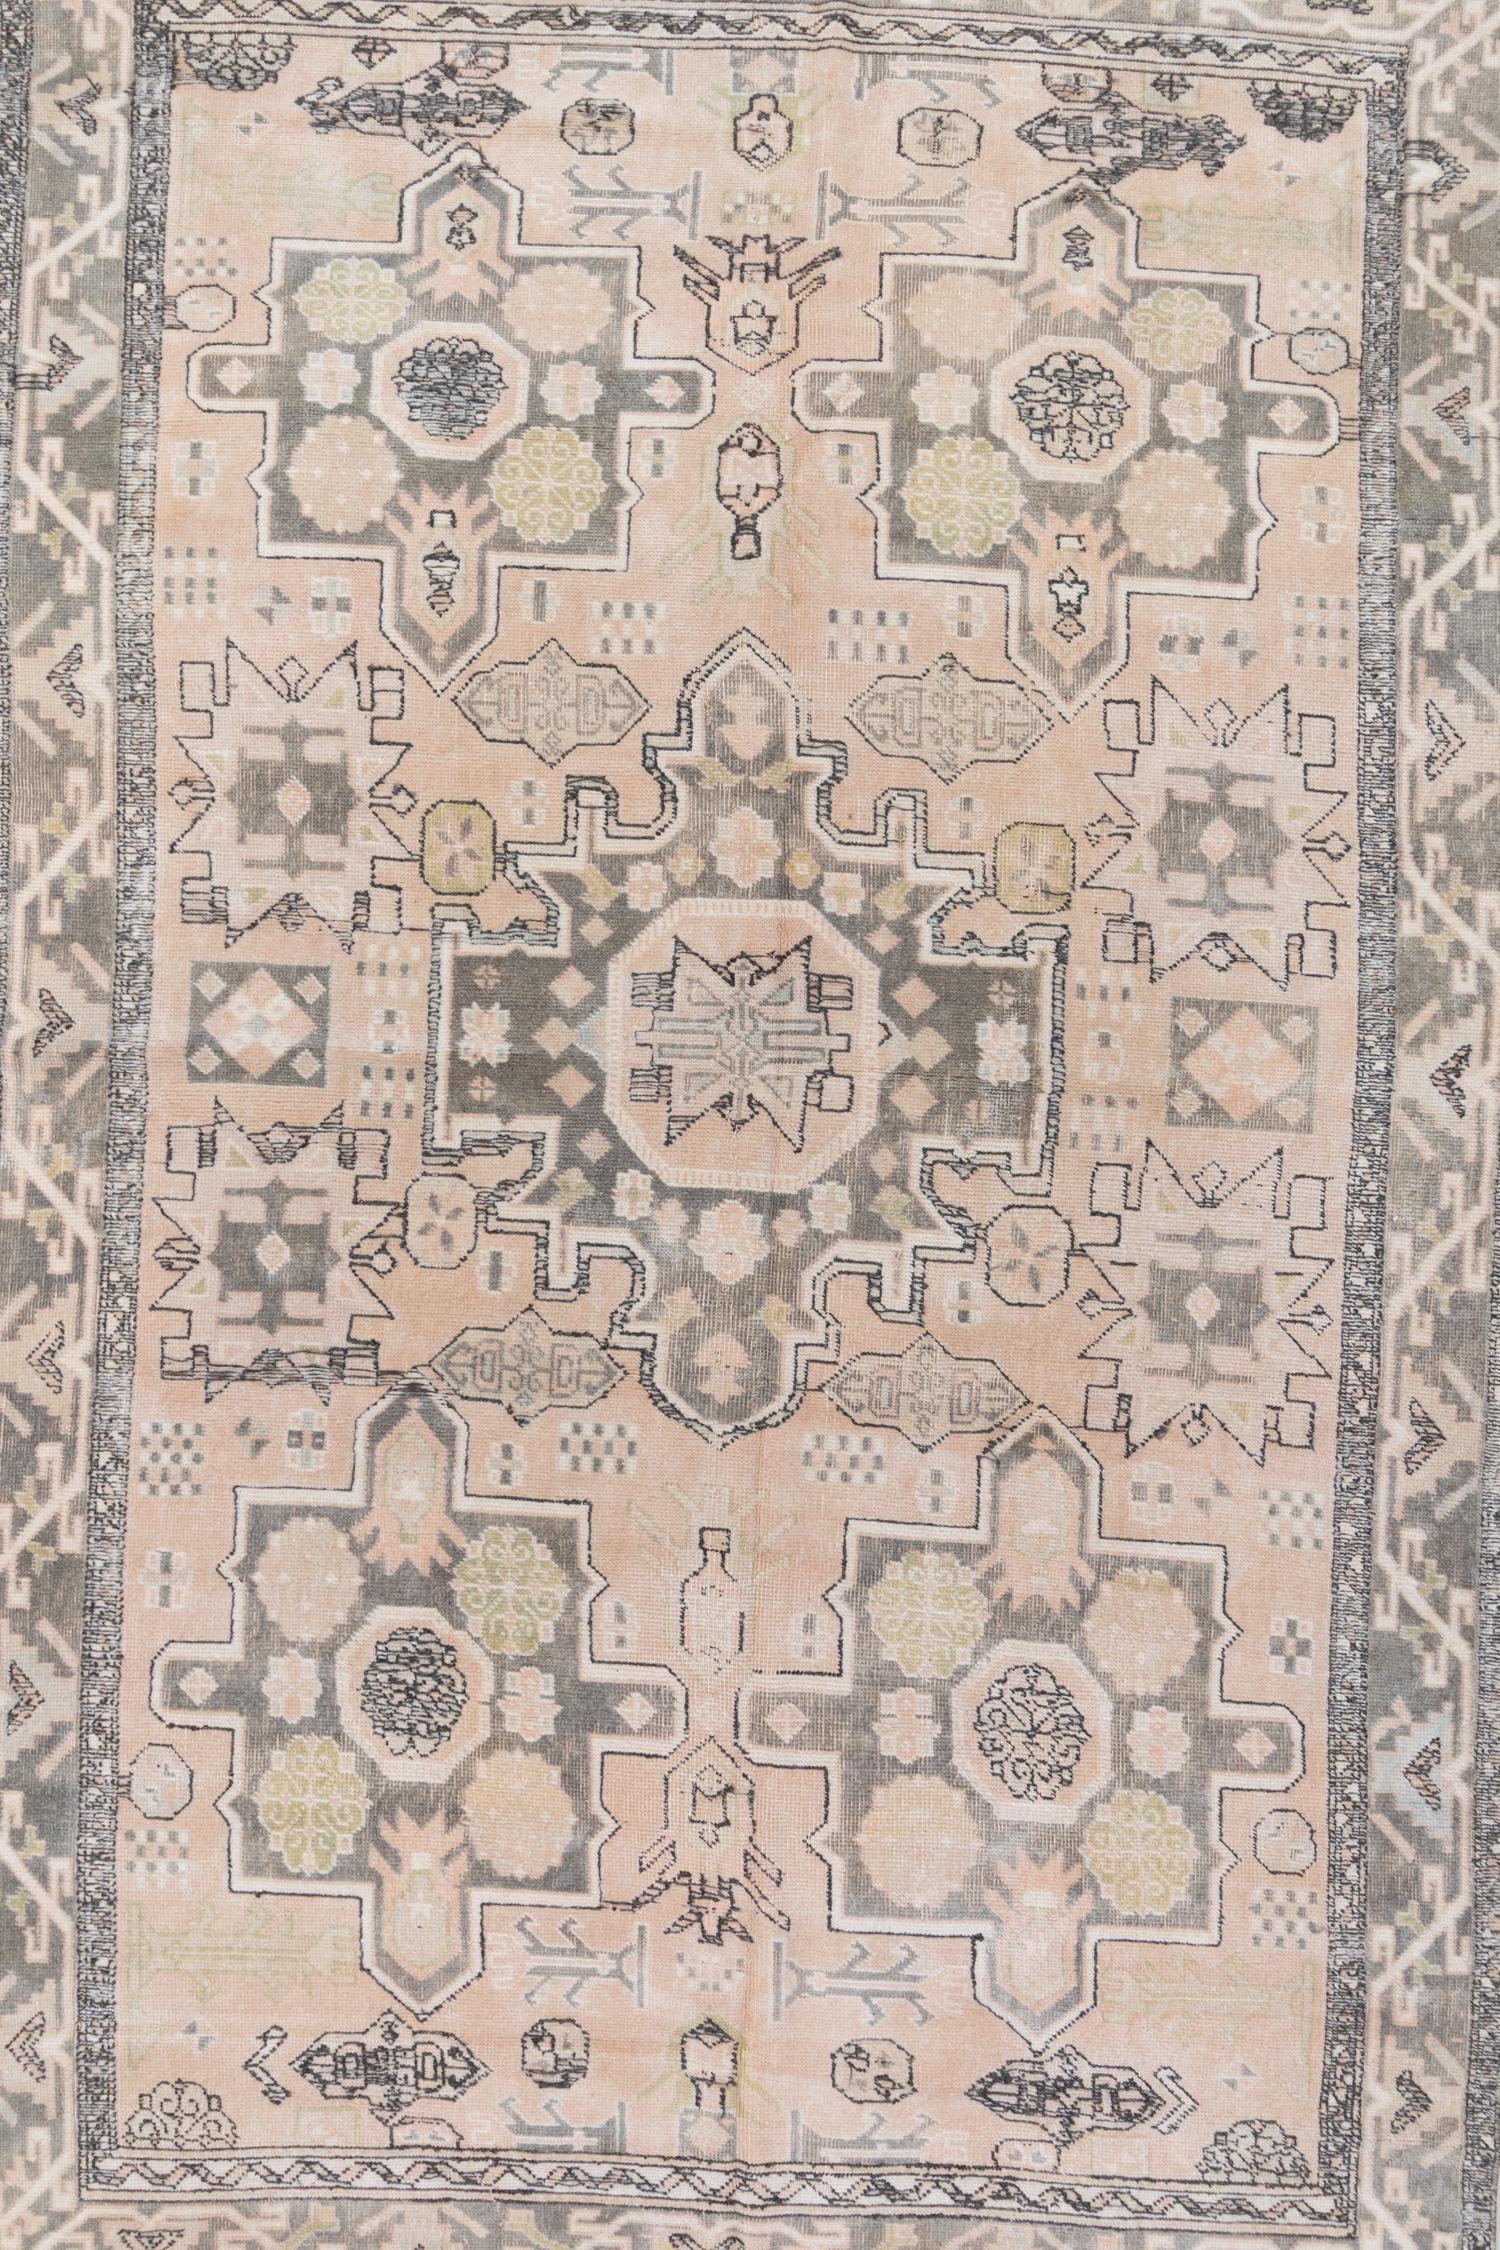 This hand woven vintage Turkish rug has a subtle patina and lovely pastel colorway.

Wear Guide: 2

Wear notes:
Vintage and antique rugs are by nature, pre-loved and may show evidence of their past. There are varying degrees of wear to vintage